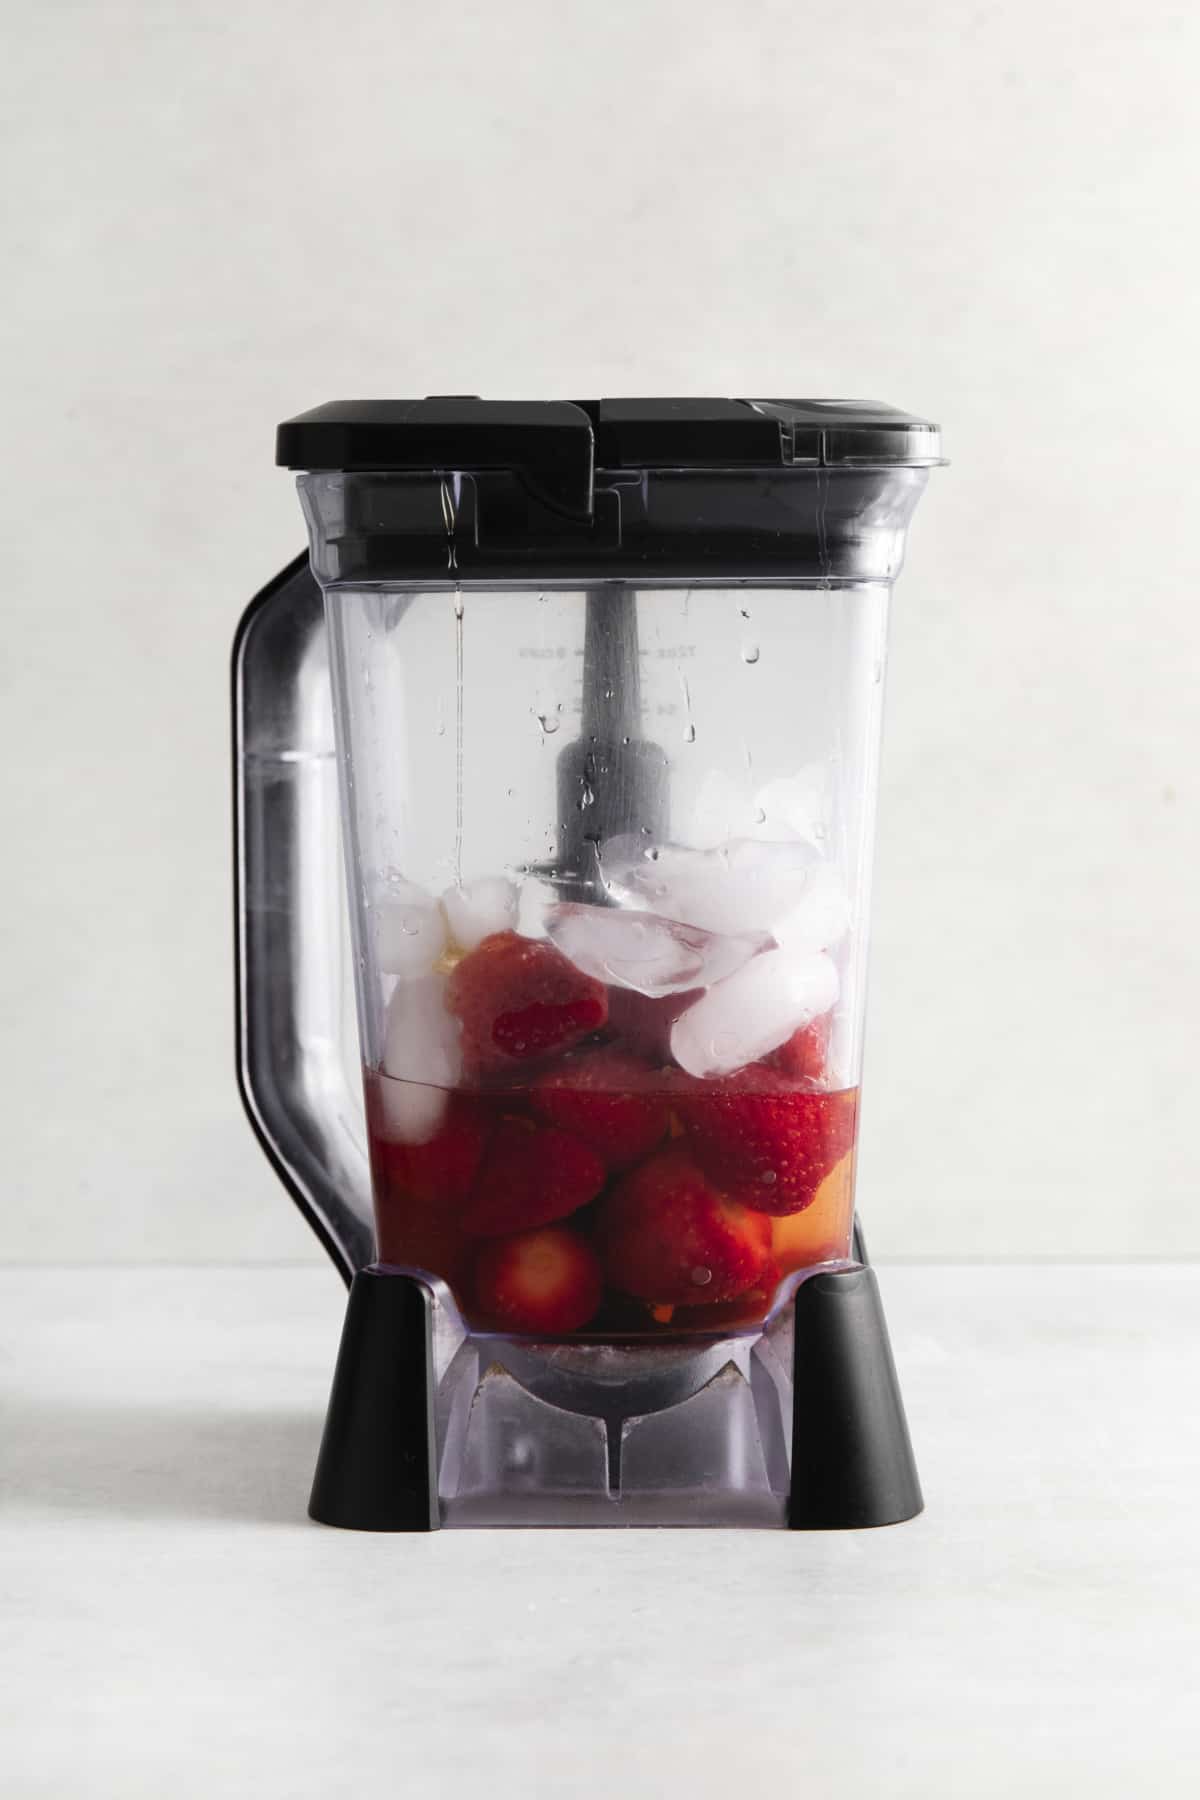 strawberries and ice in a blender.